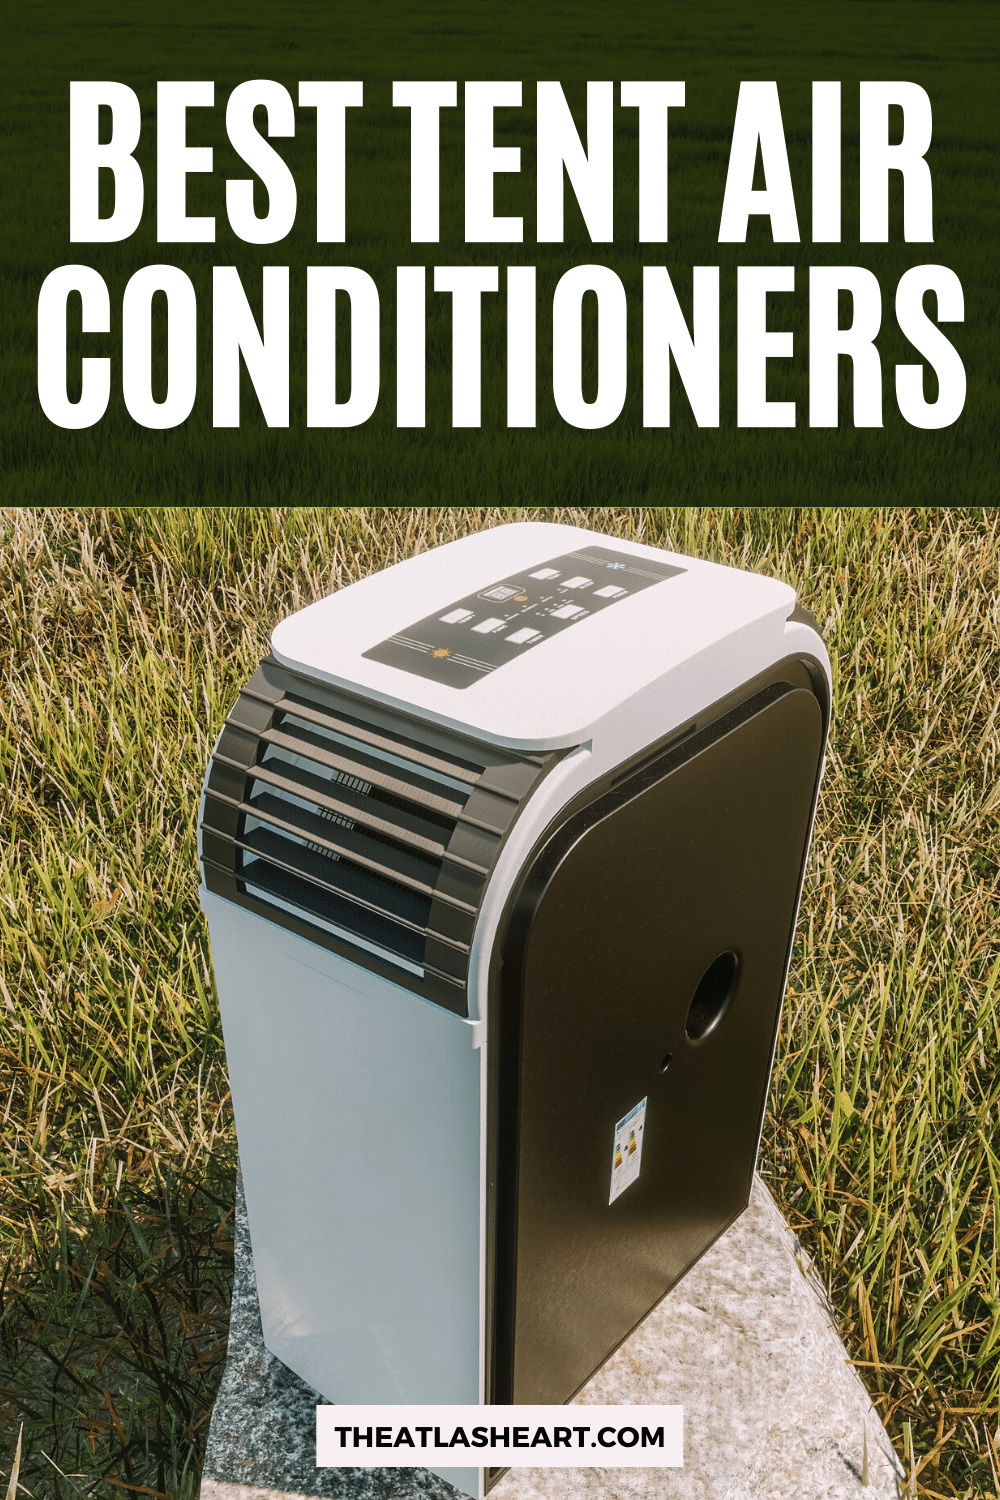 11 Best Tent Air Conditioners to Stay Cool on Stifling Summer Days